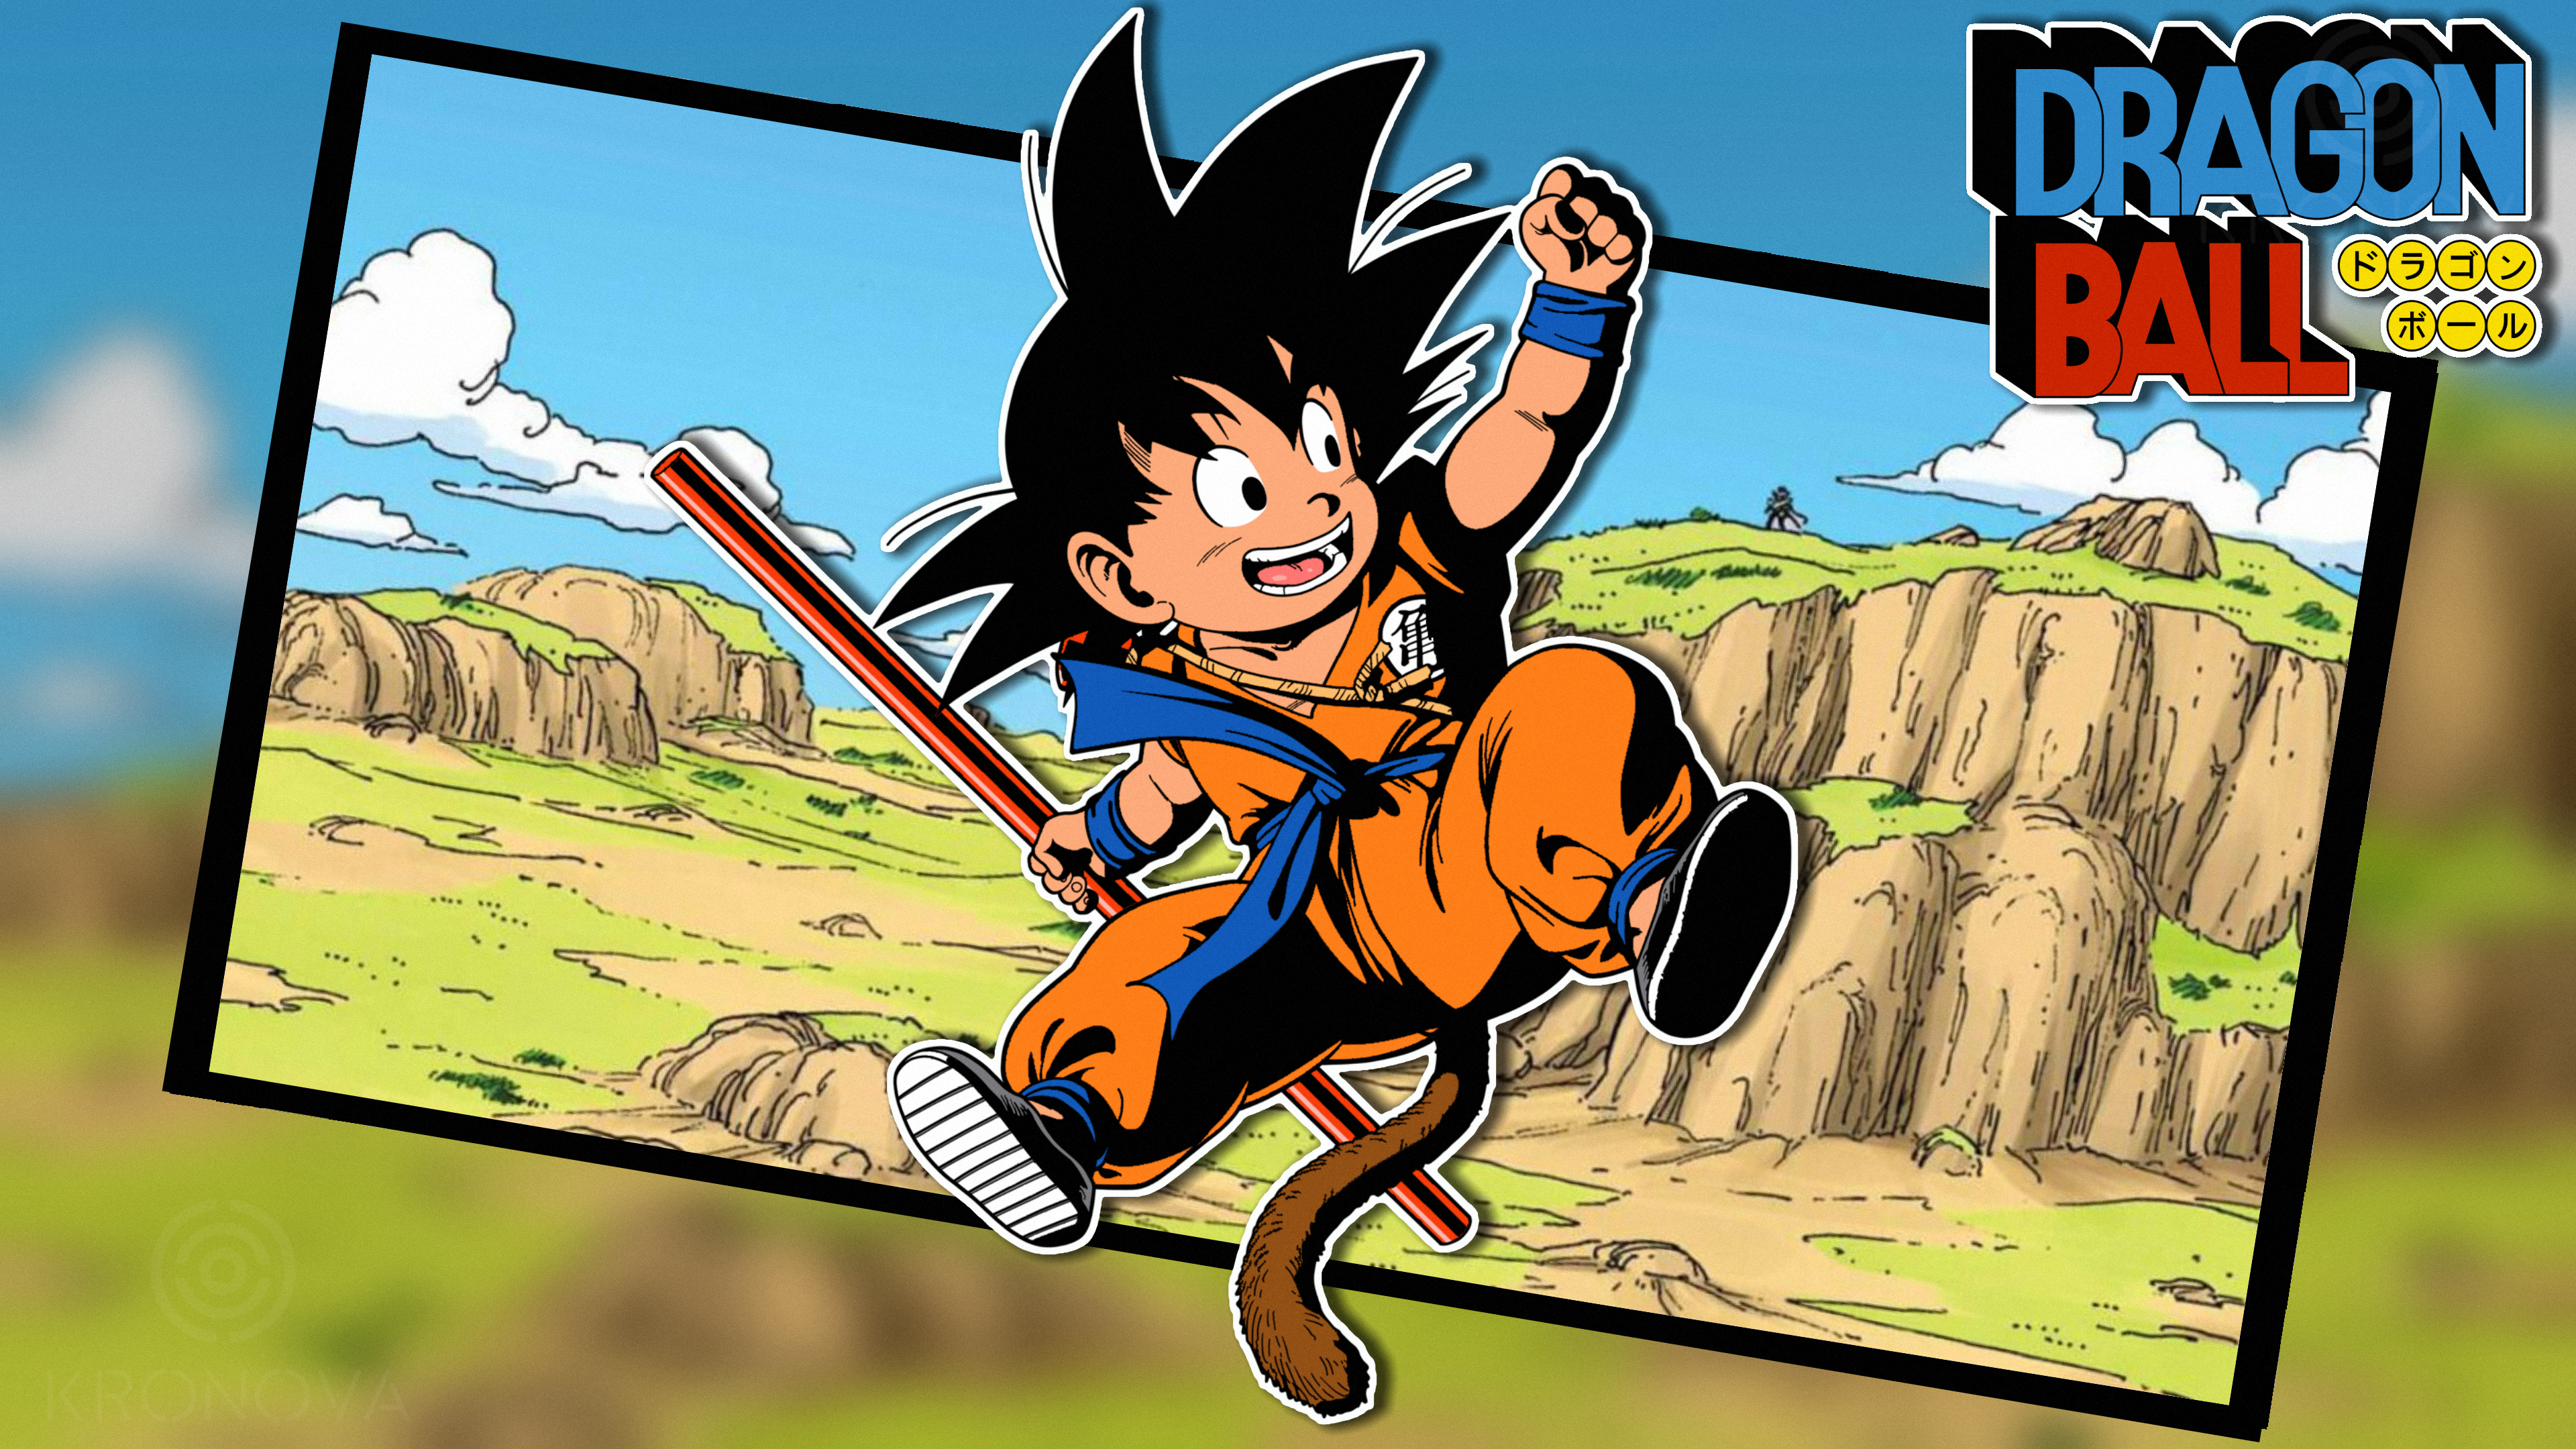 Anime 3840x2160 Dragon Ball Son Goku picture-in-picture anime tail